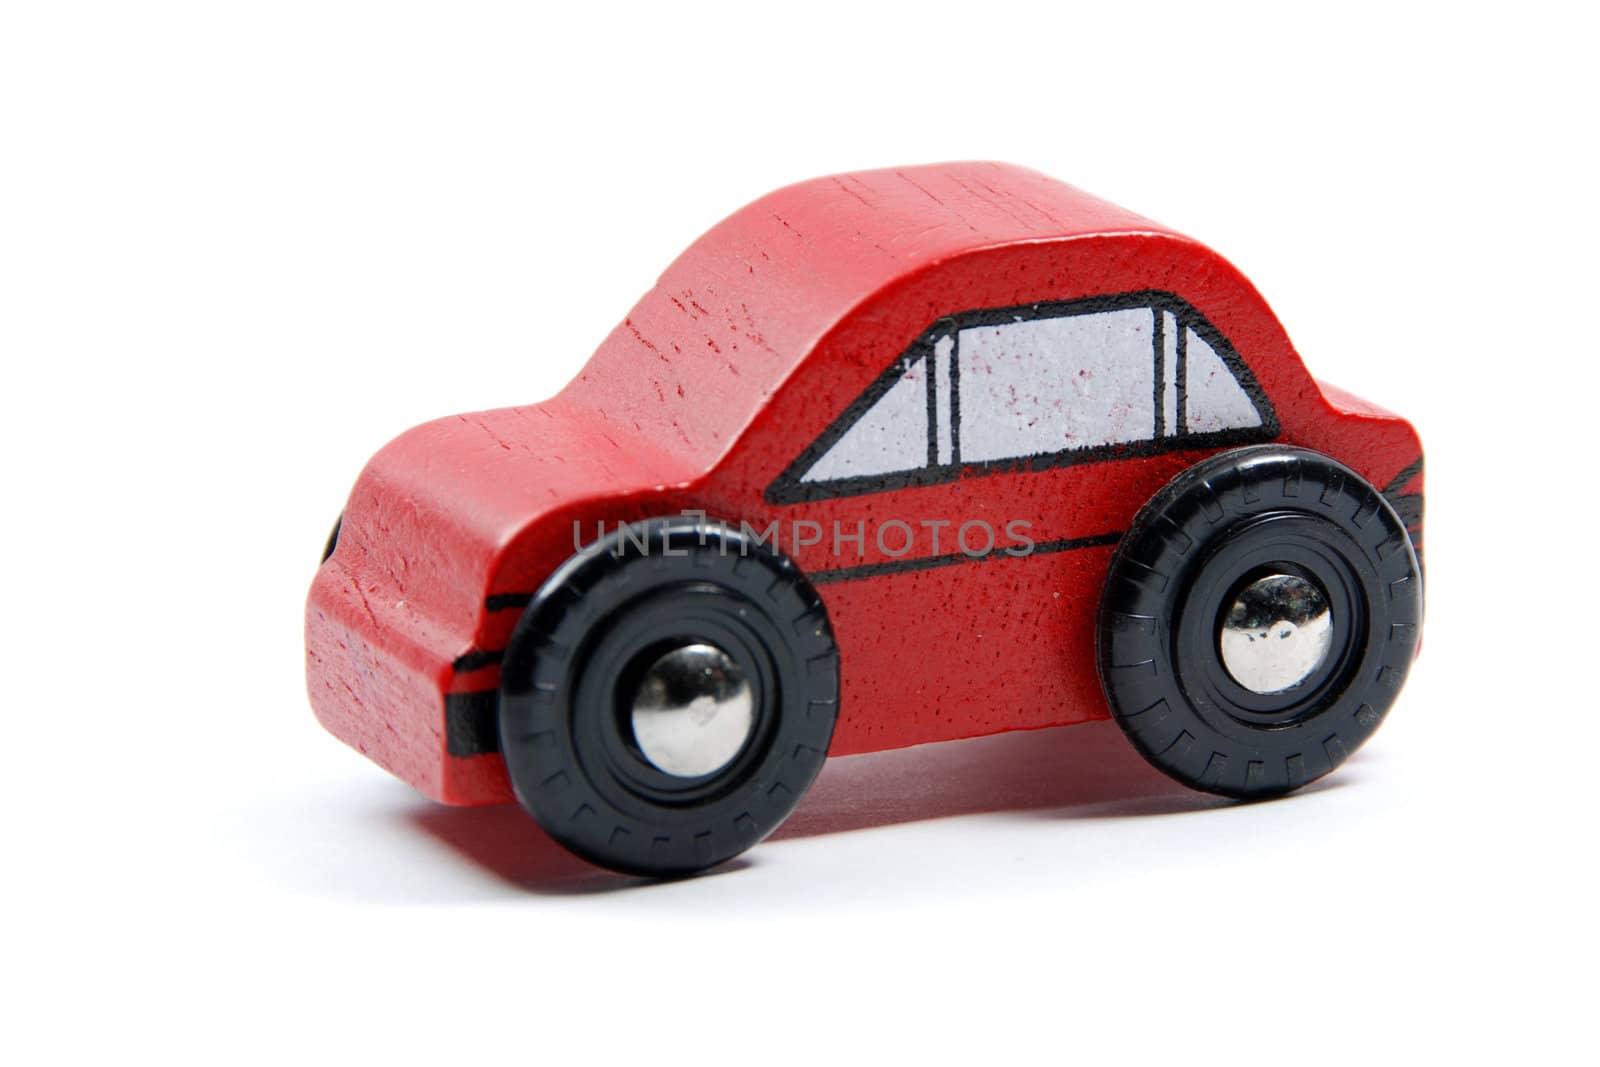 Simple red toy car